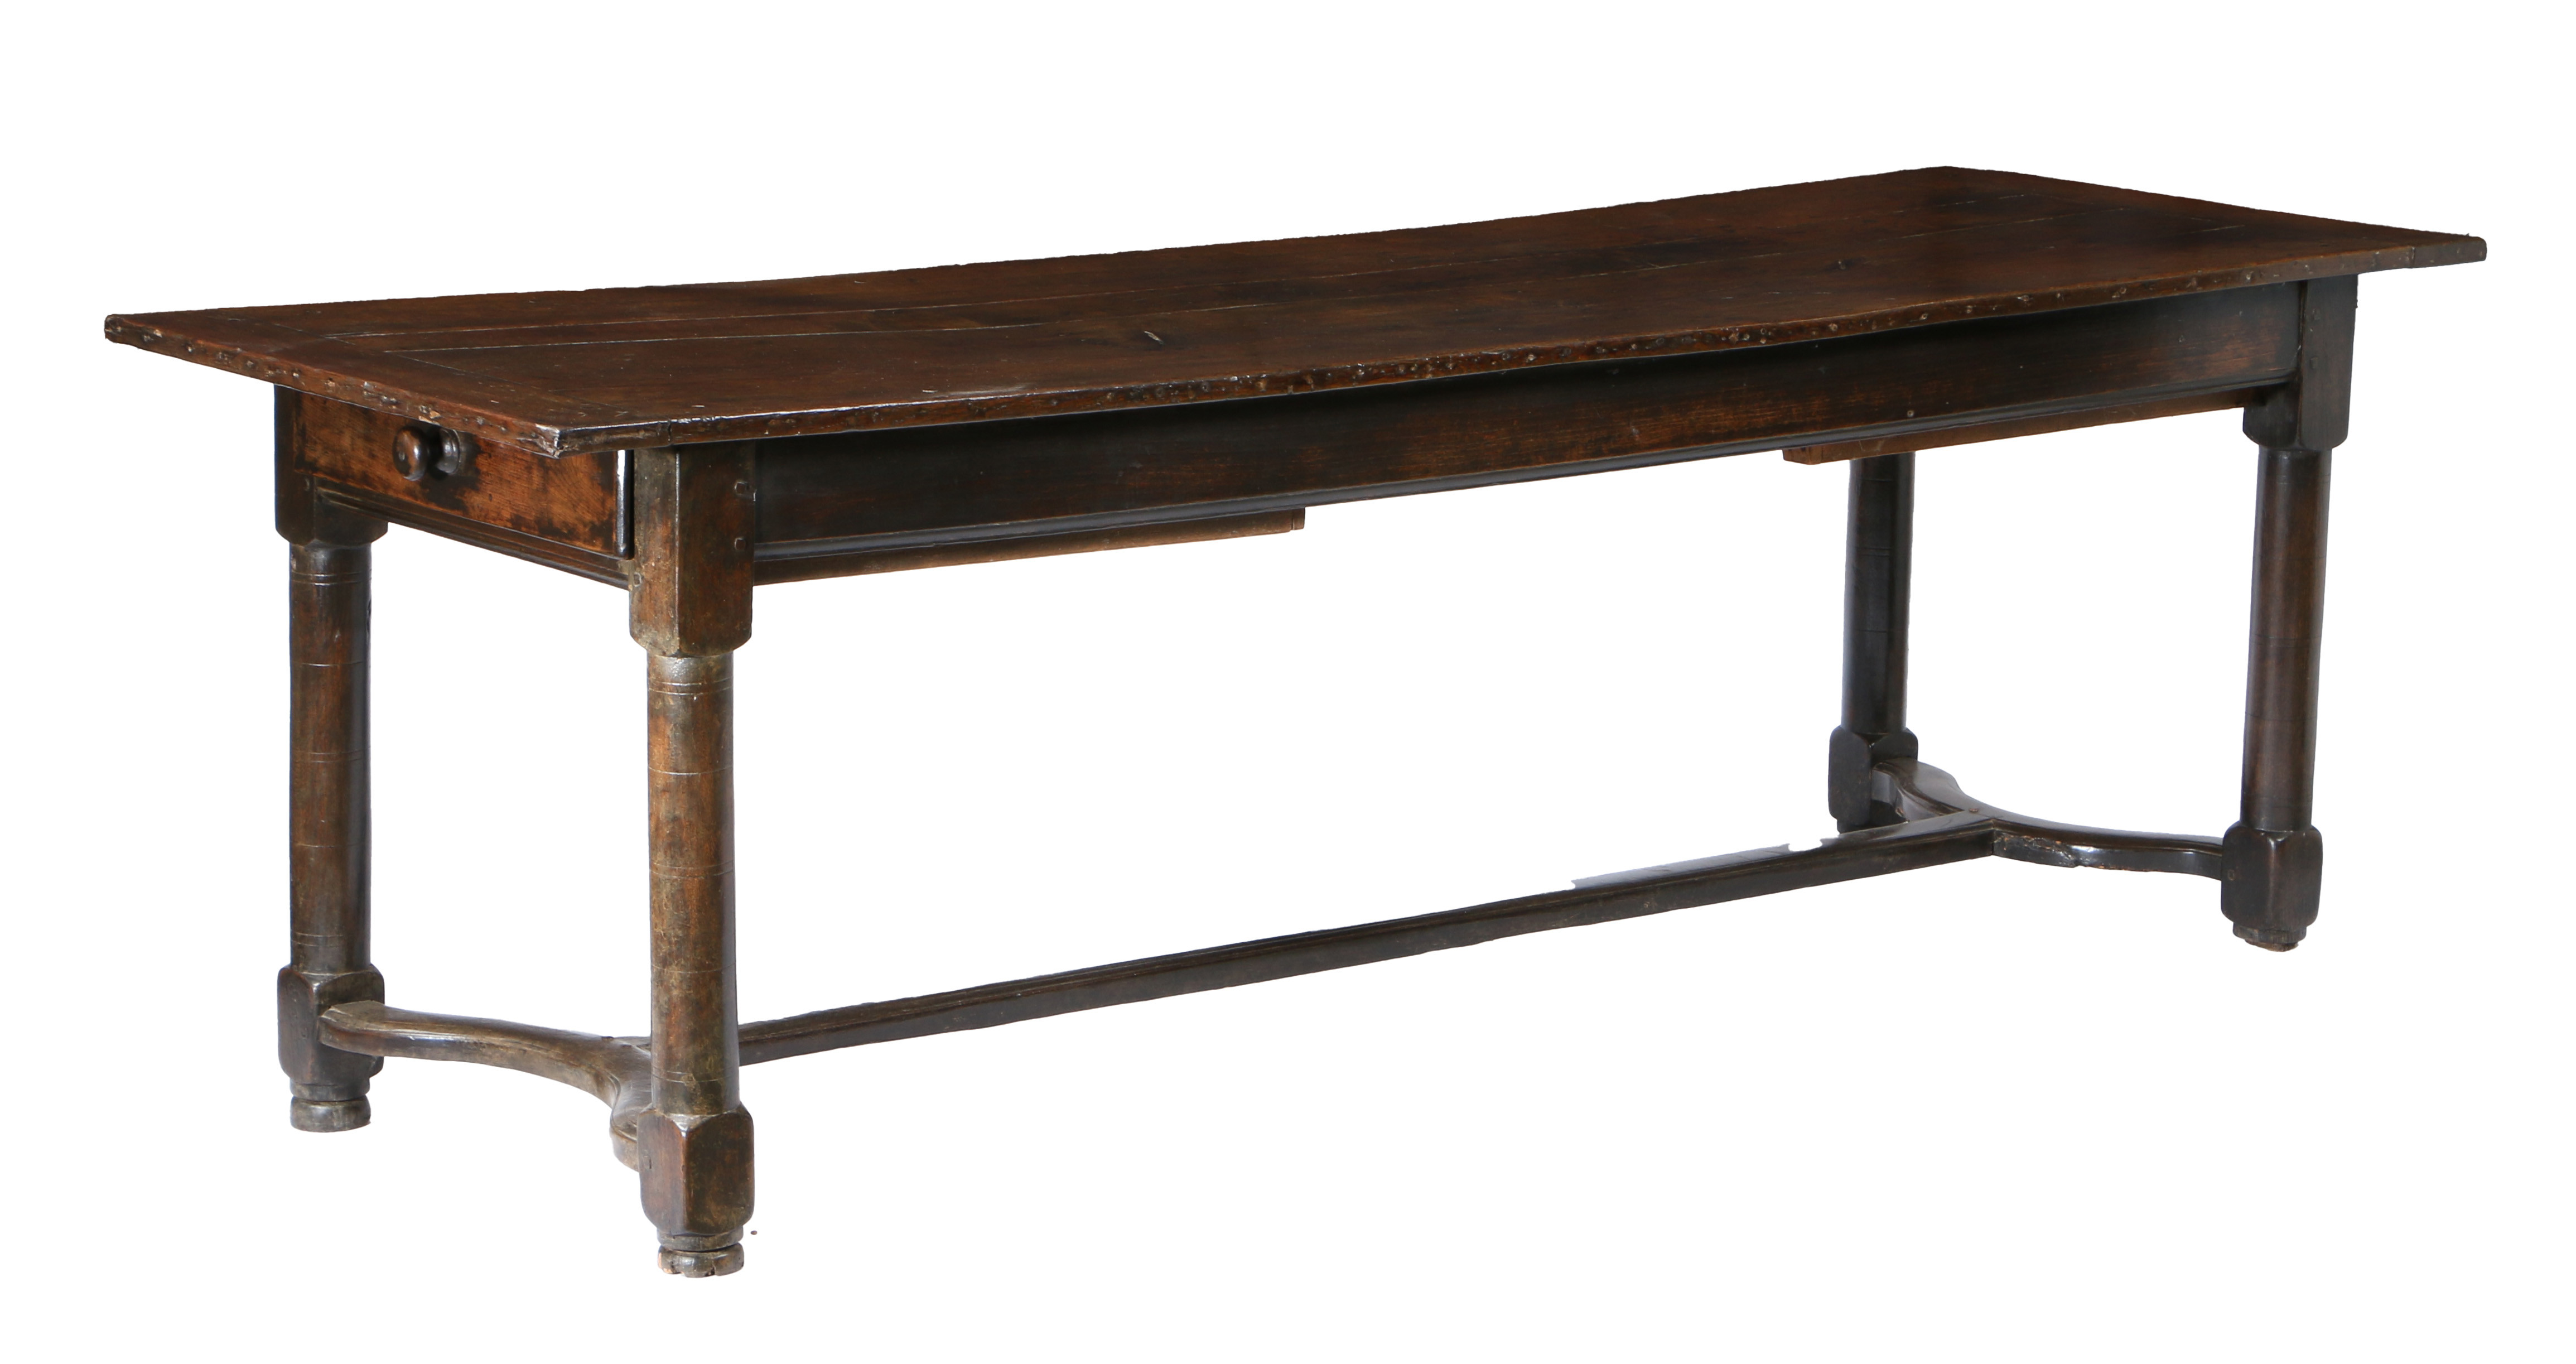 AN EARLY 19TH CENTURY FRENCH OAK FARMHOUSE TABLE. - Image 2 of 2